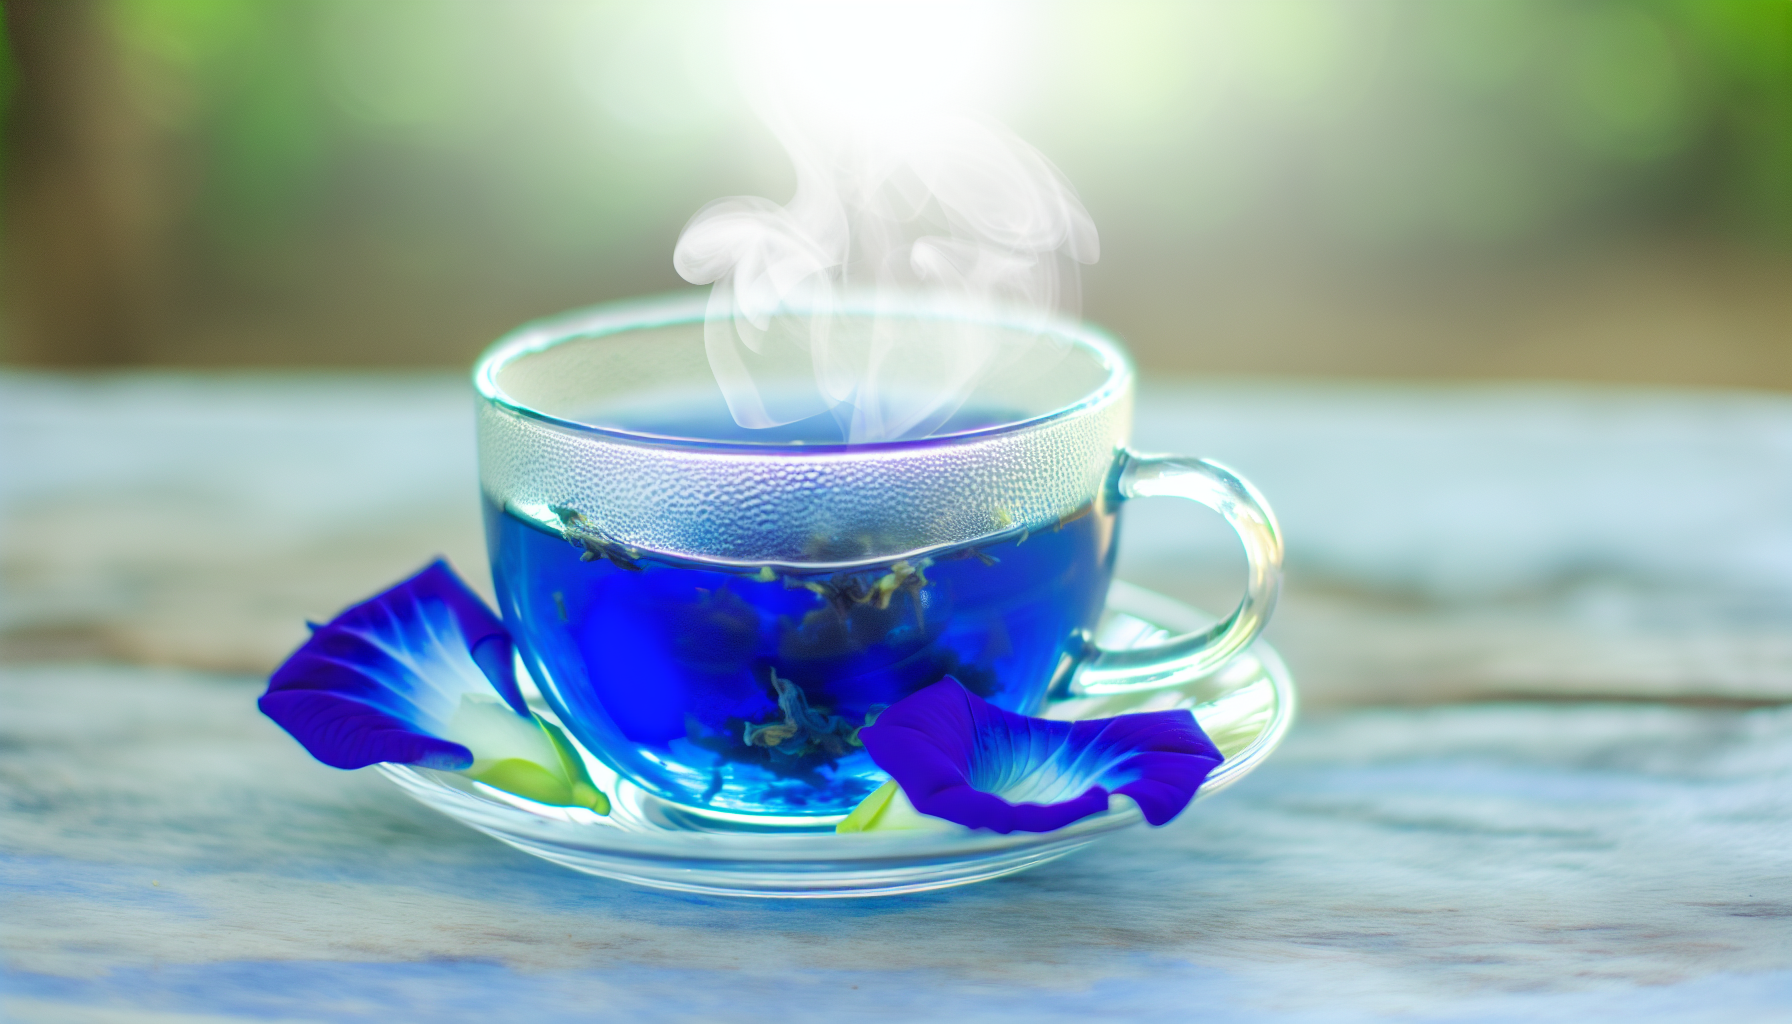 Steaming cup of freshly brewed blue tea with butterfly pea flowers